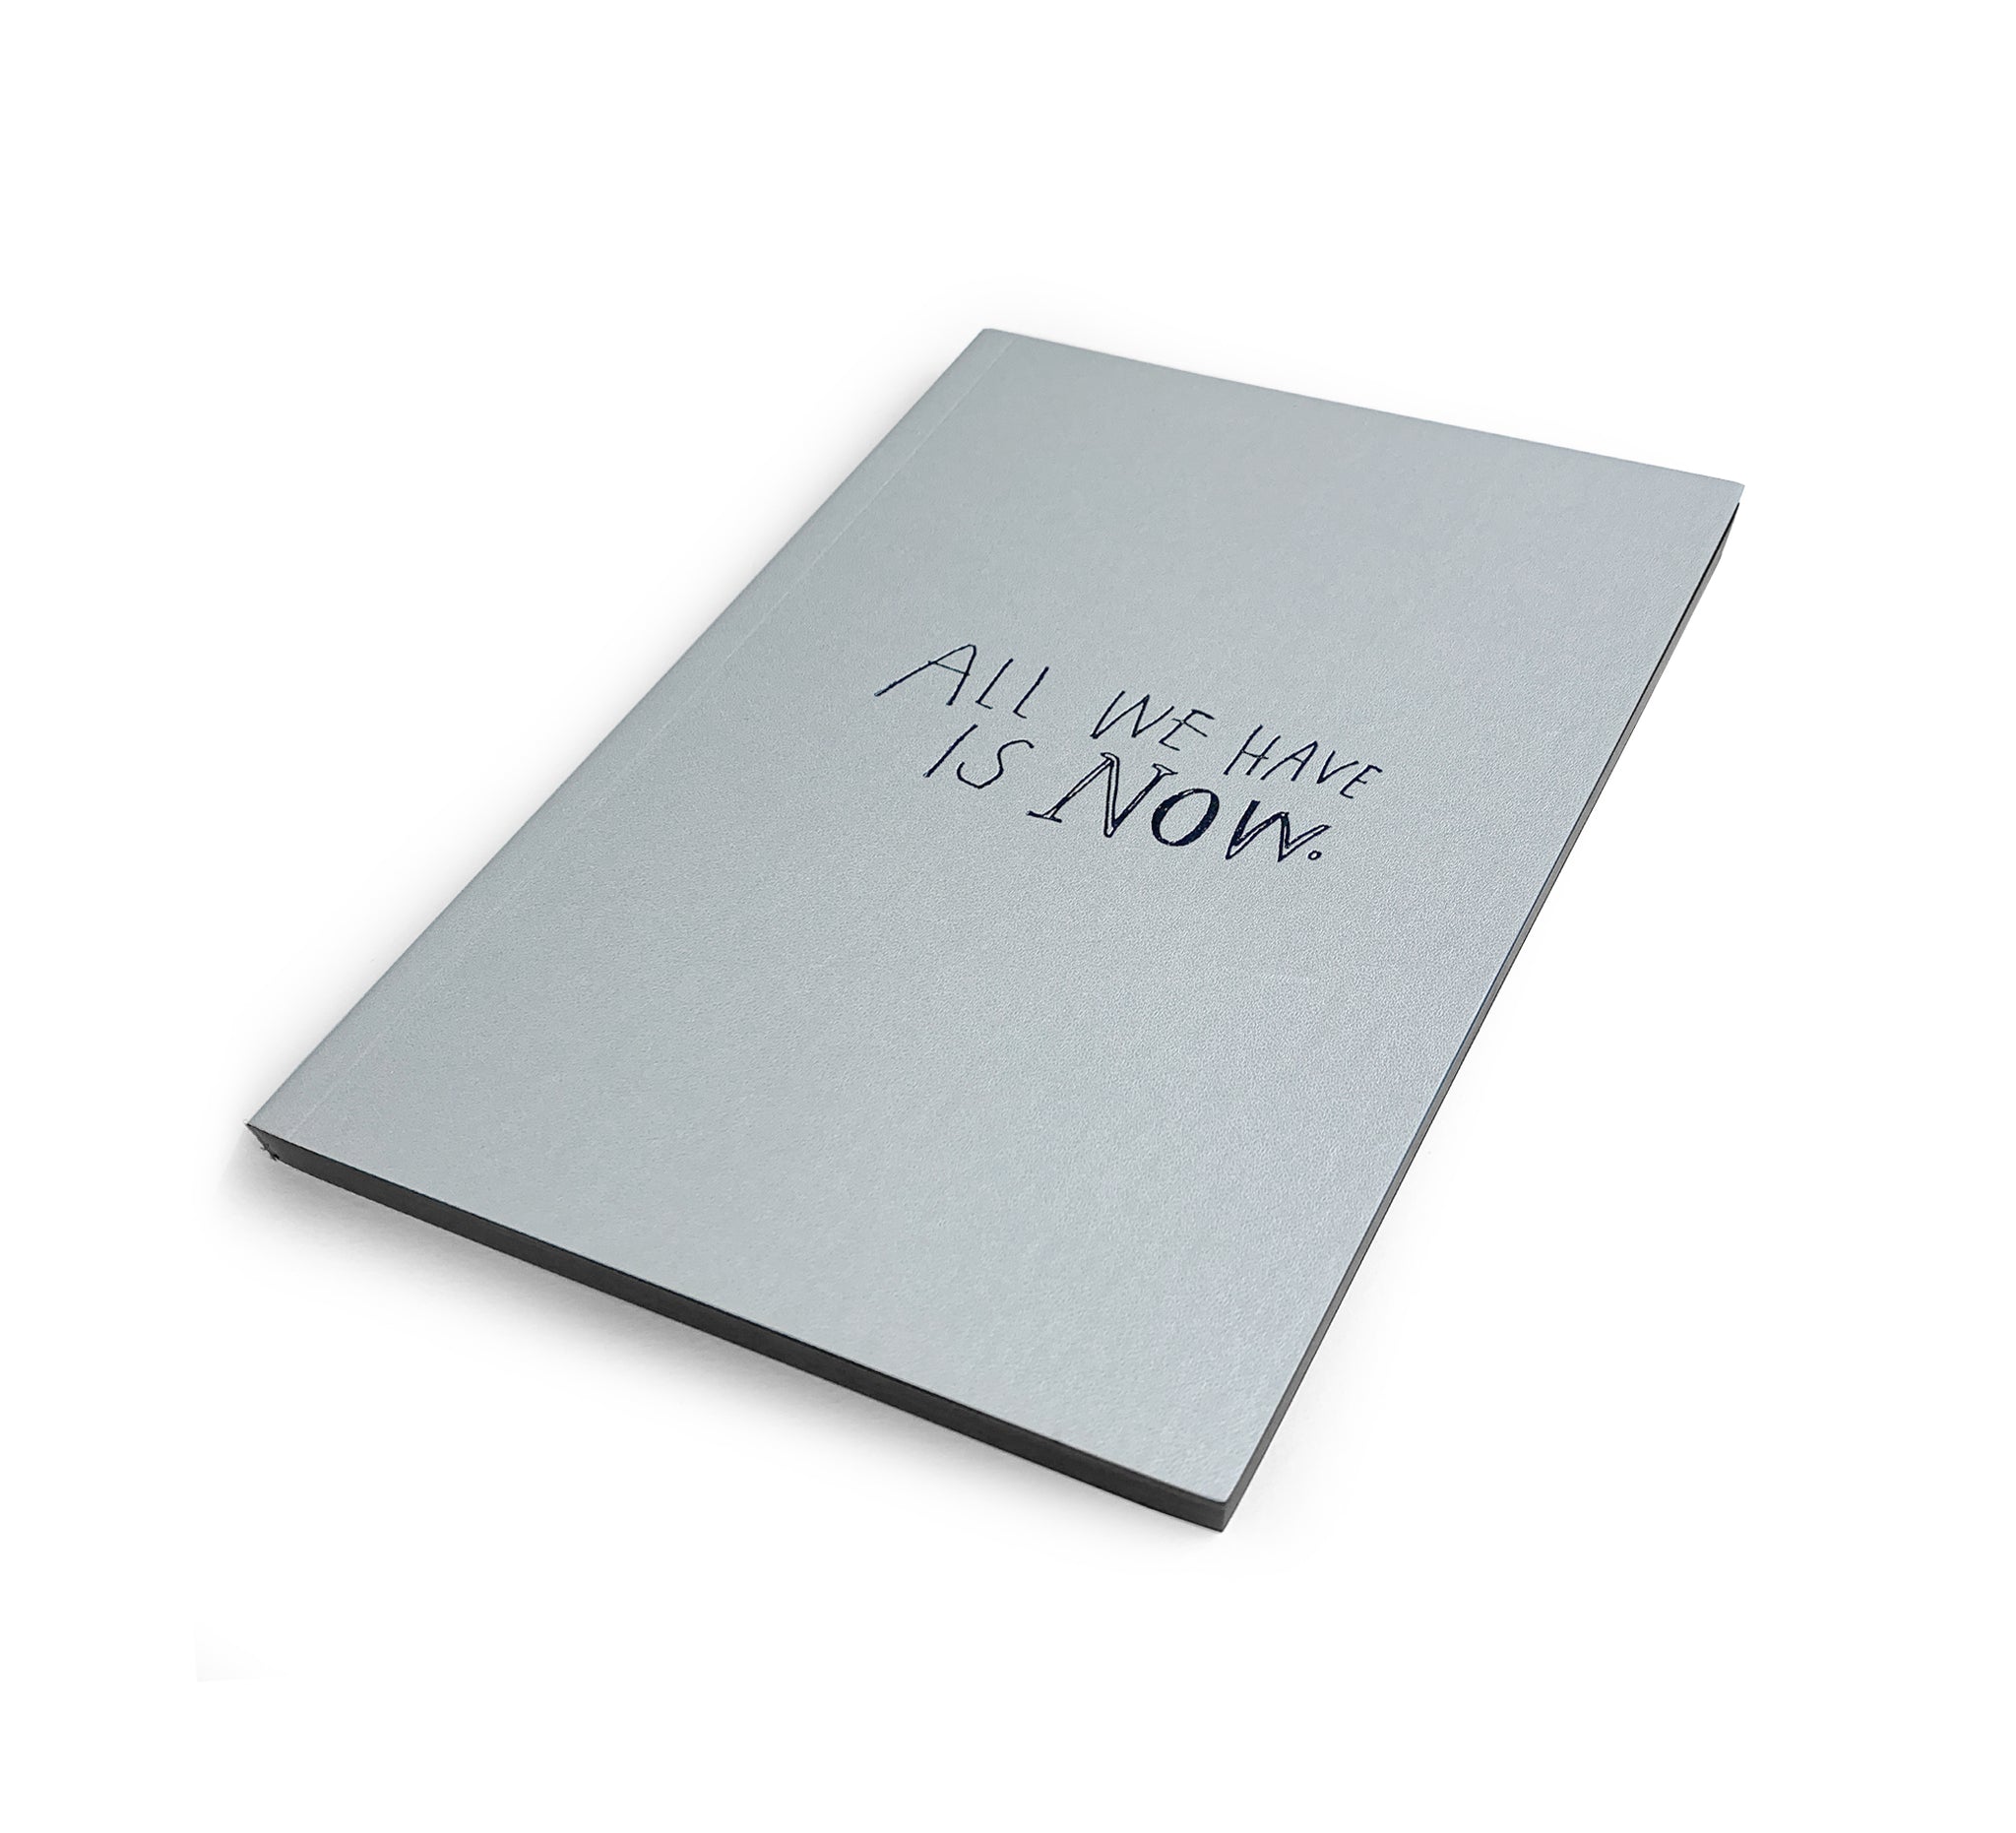 ALL WE HAVE IS NOW notebook